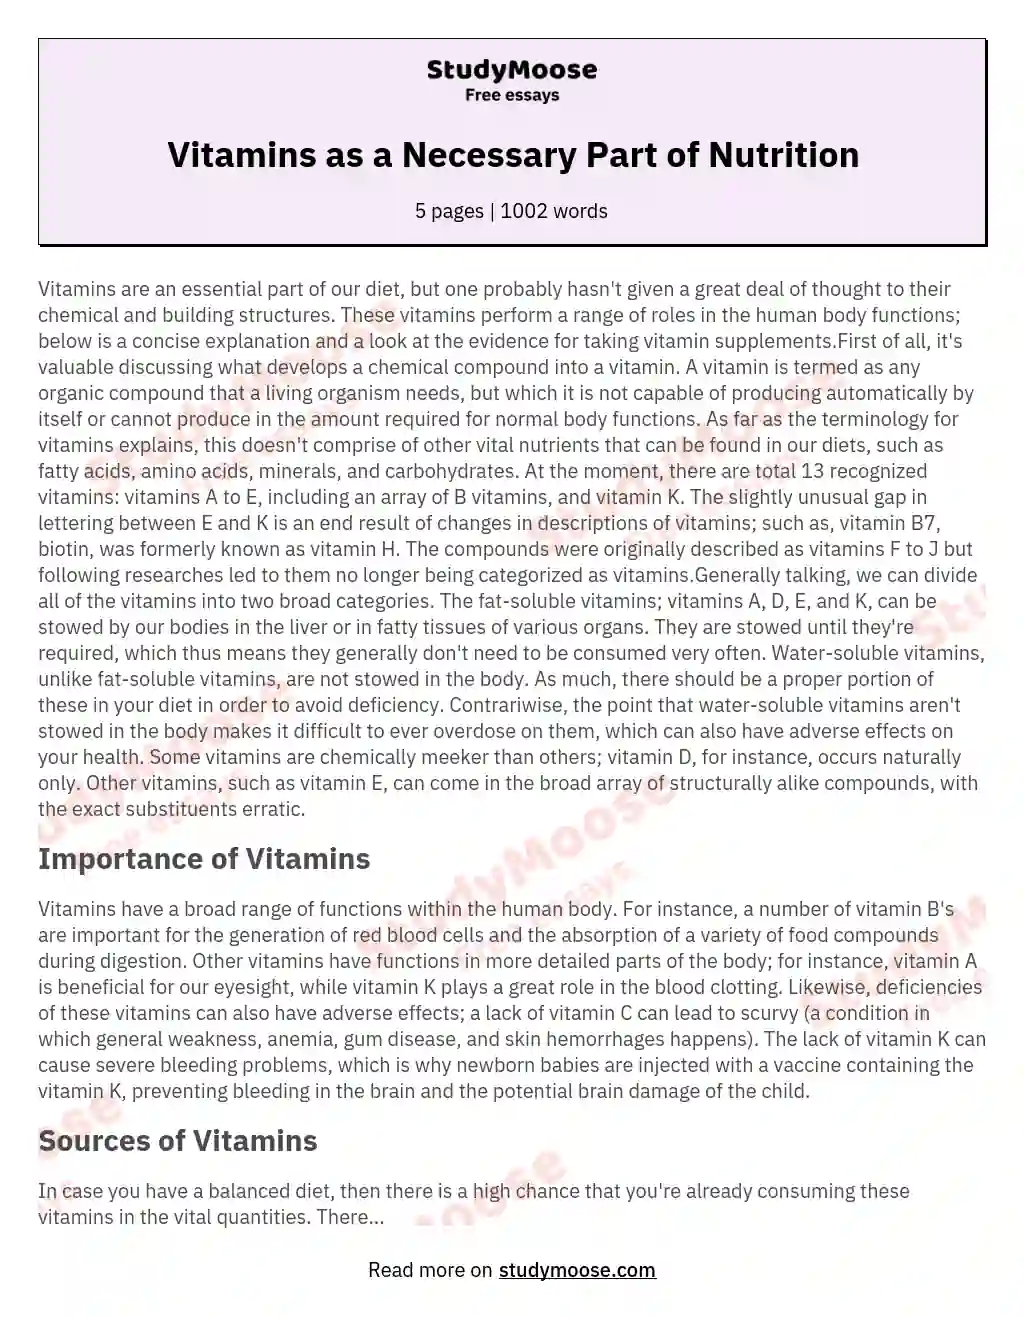 Vitamins as a Necessary Part of Nutrition essay